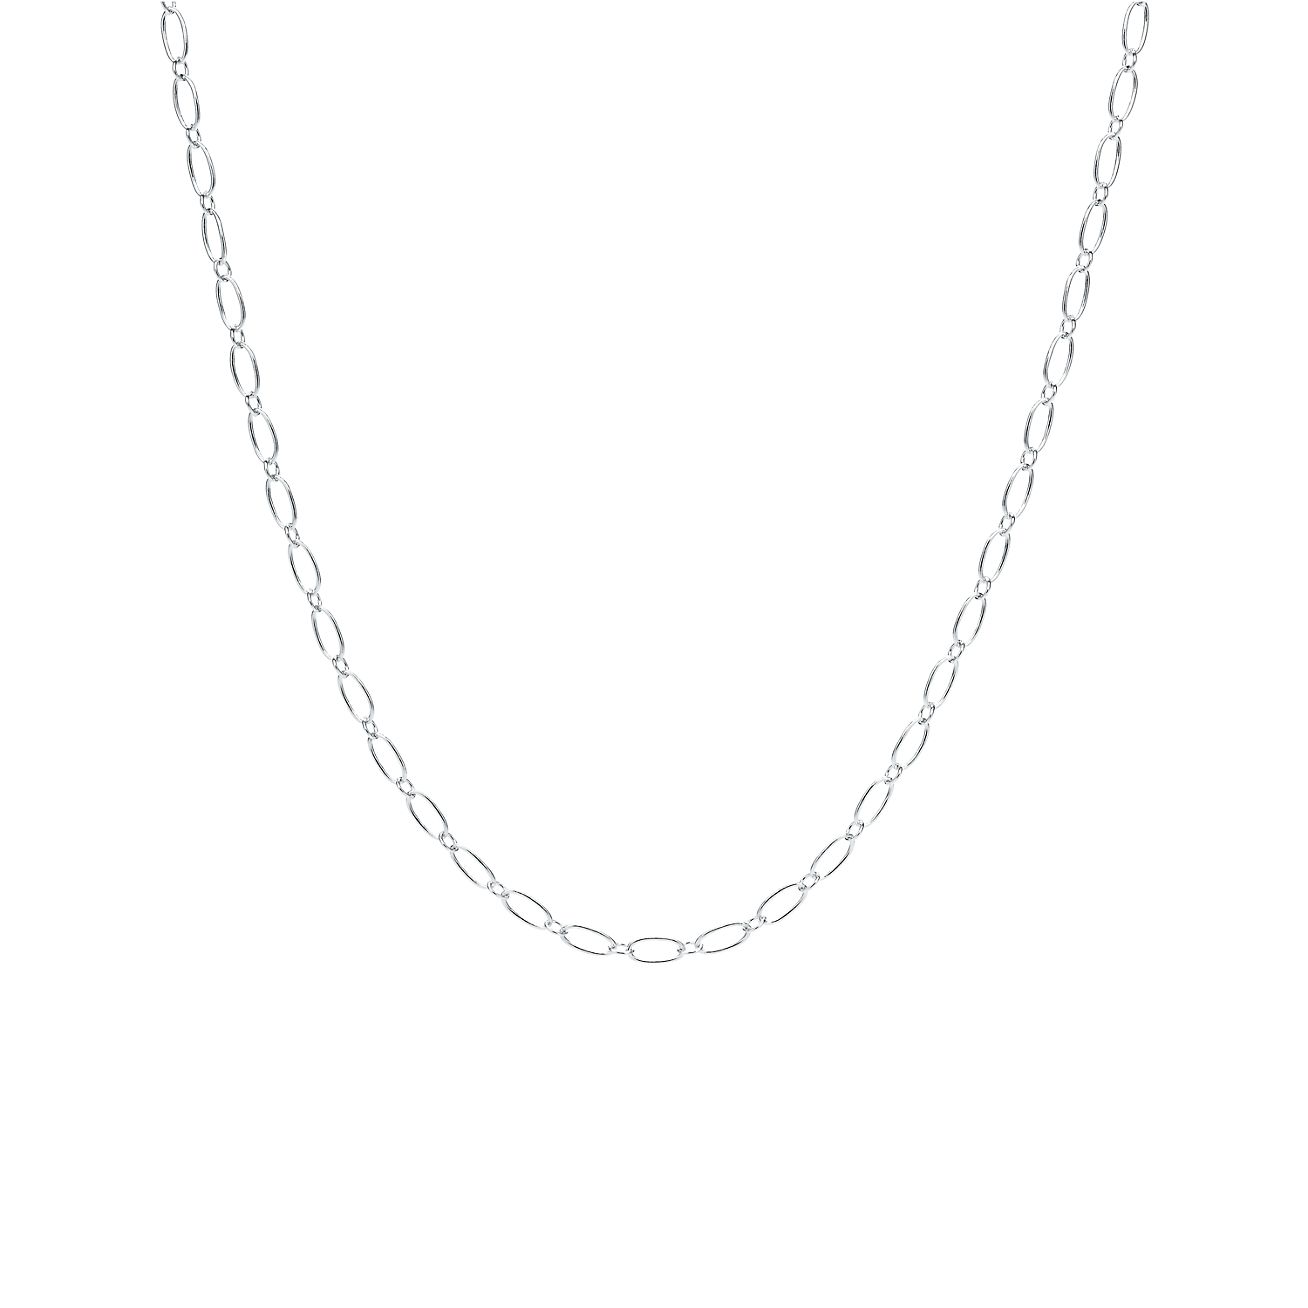 Oval link chain in sterling silver, 36 